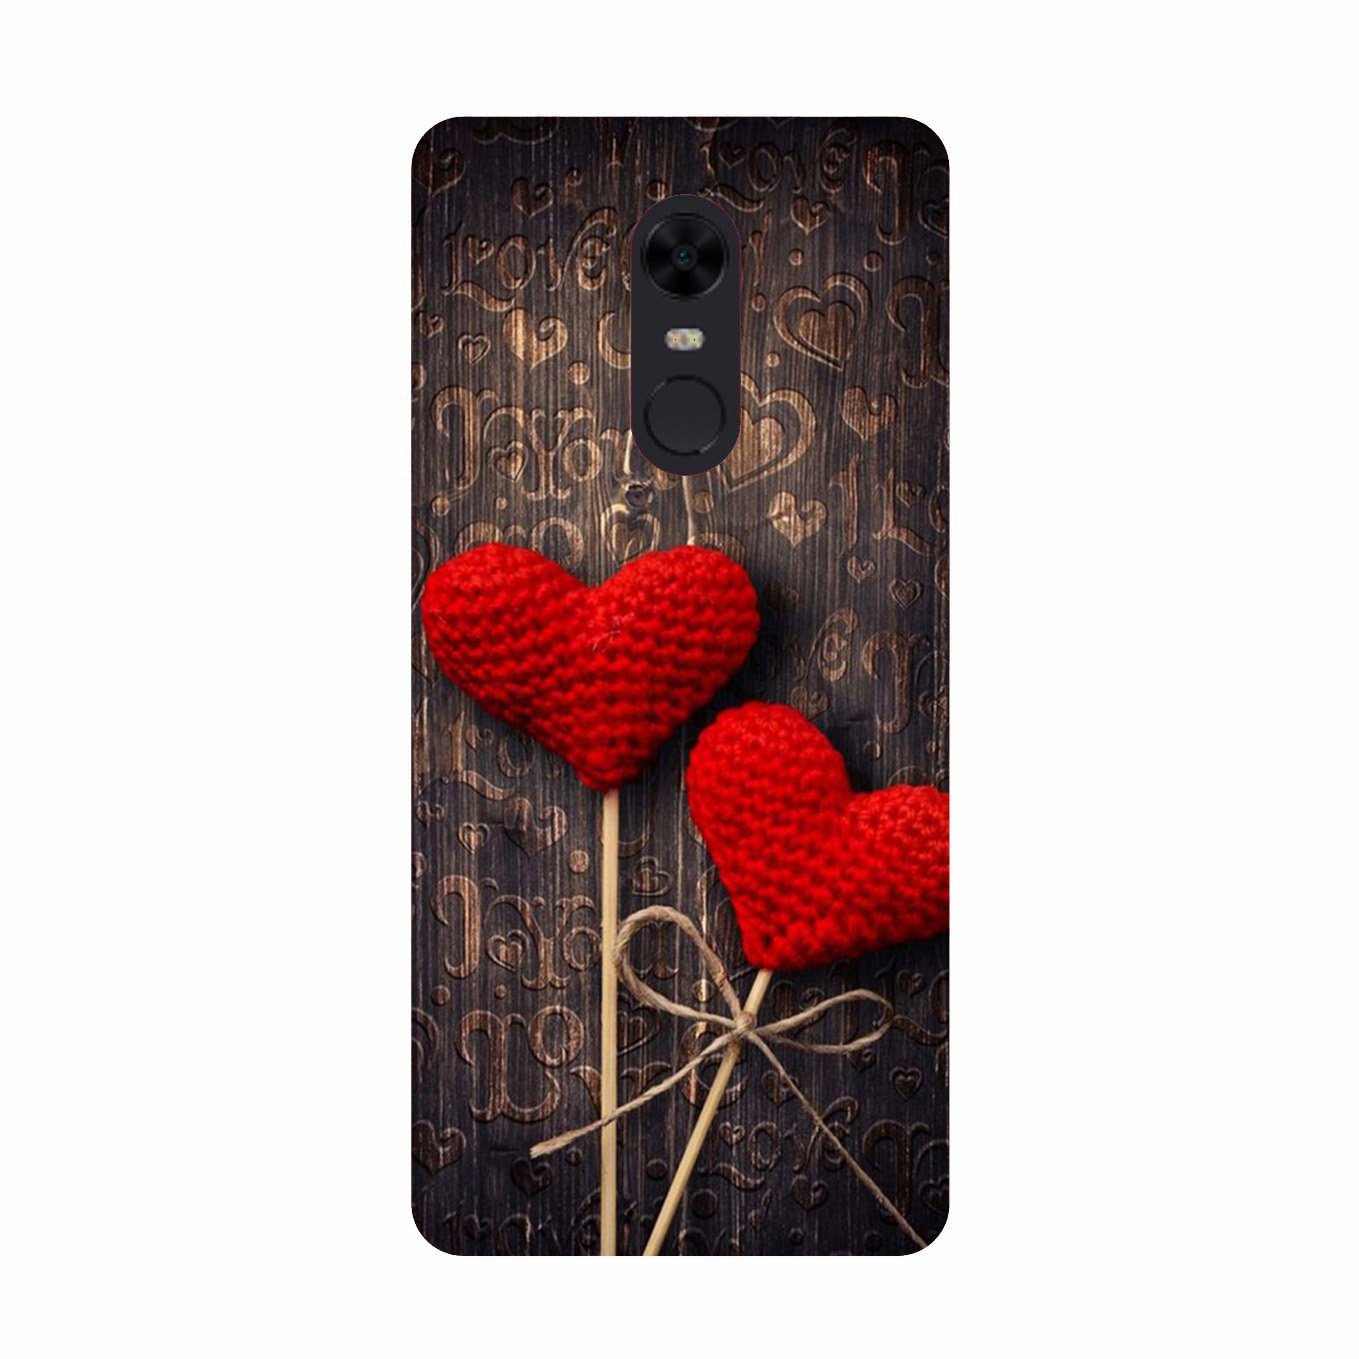 Red Hearts Case for Redmi Note 4